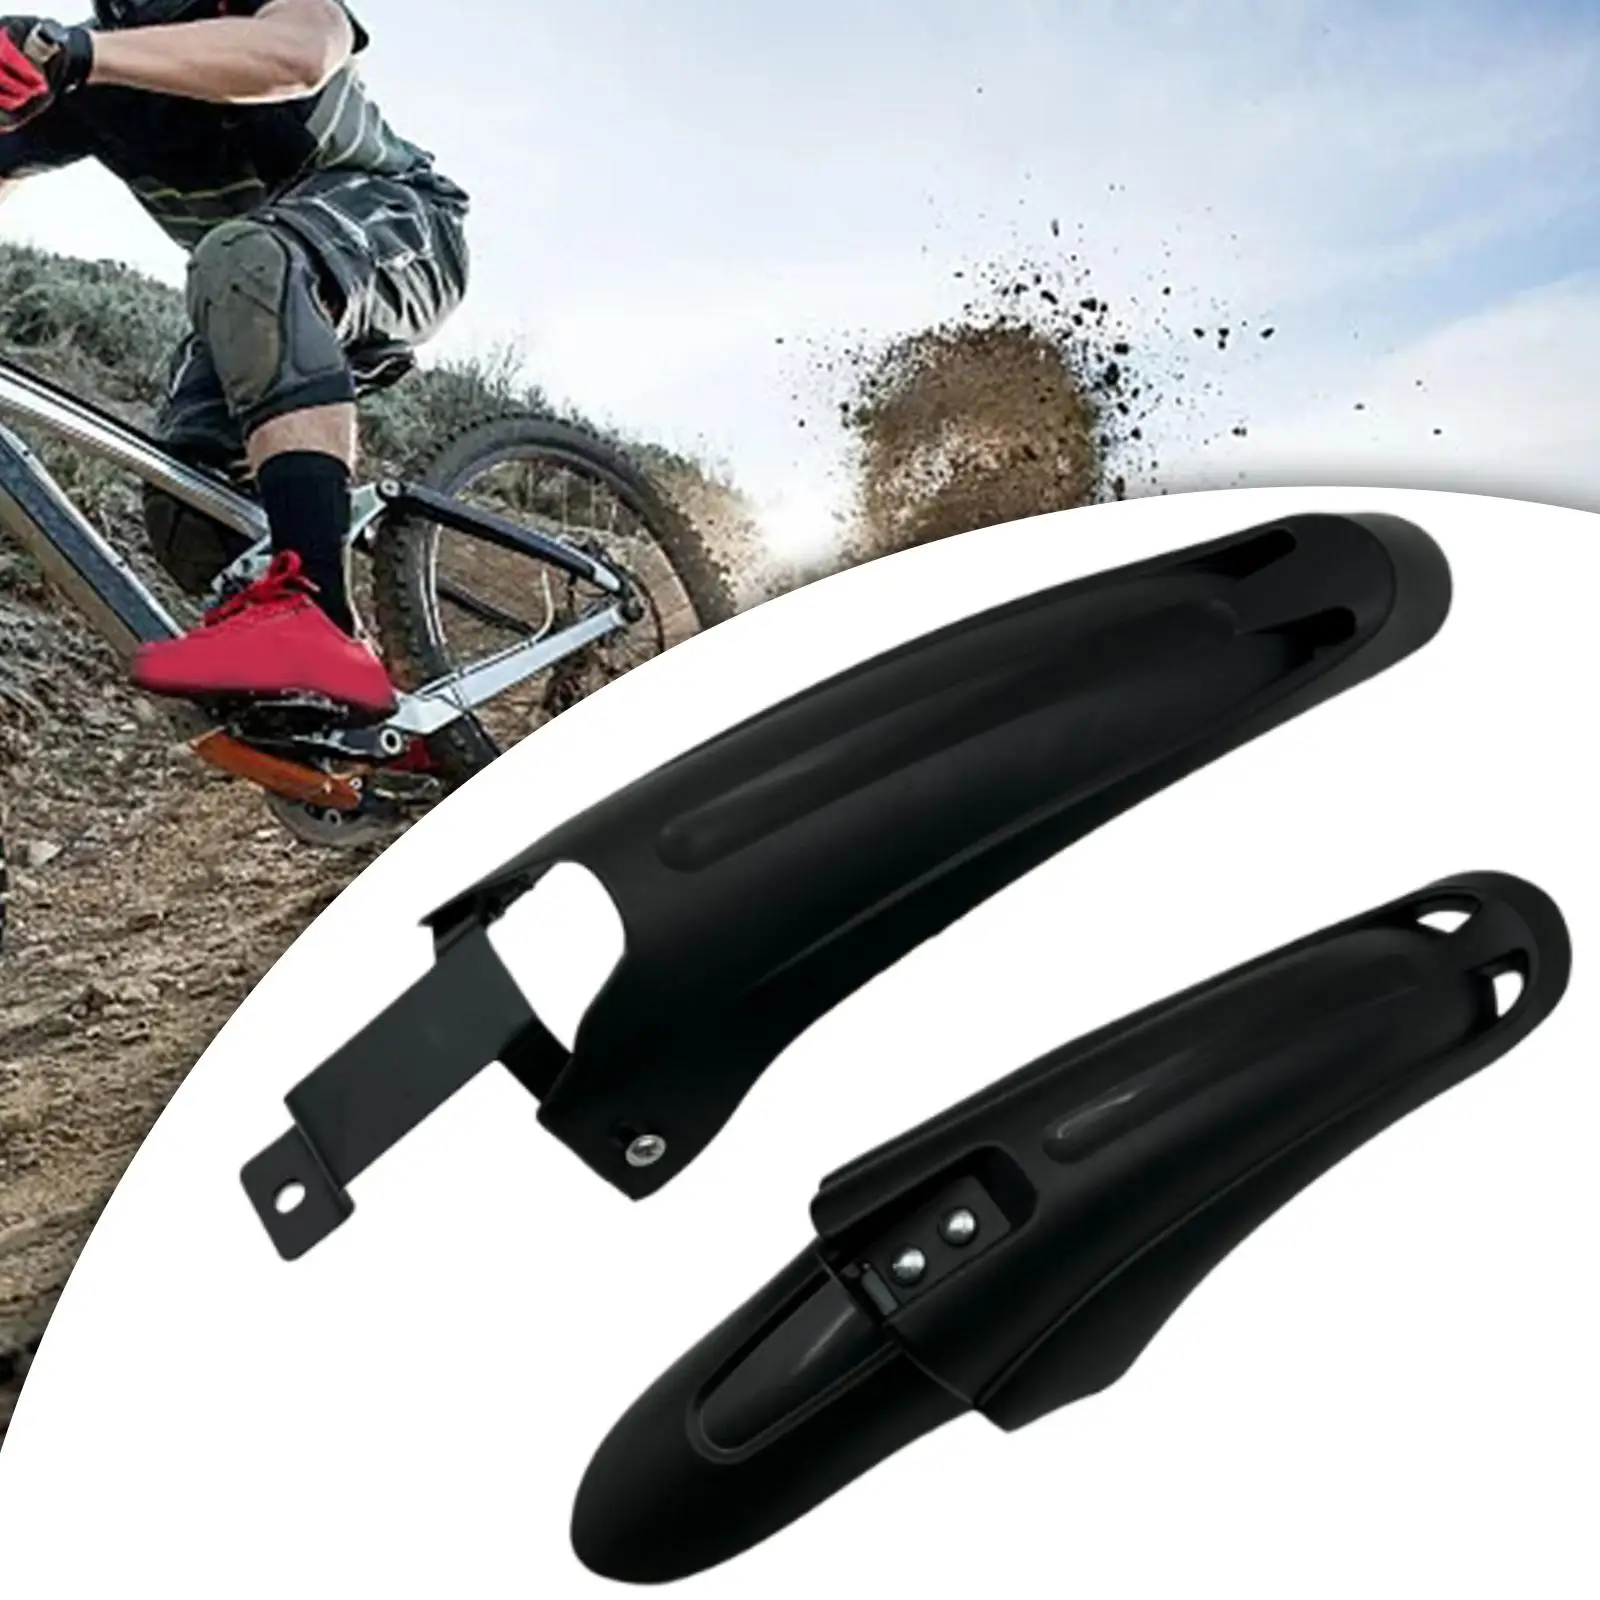 Bicycle Tire Mudguard Front and Rear for 20-26inch Mud Flaps Bike Fenders for BMX Road Bikes Mountain Bikes Cycling Riding